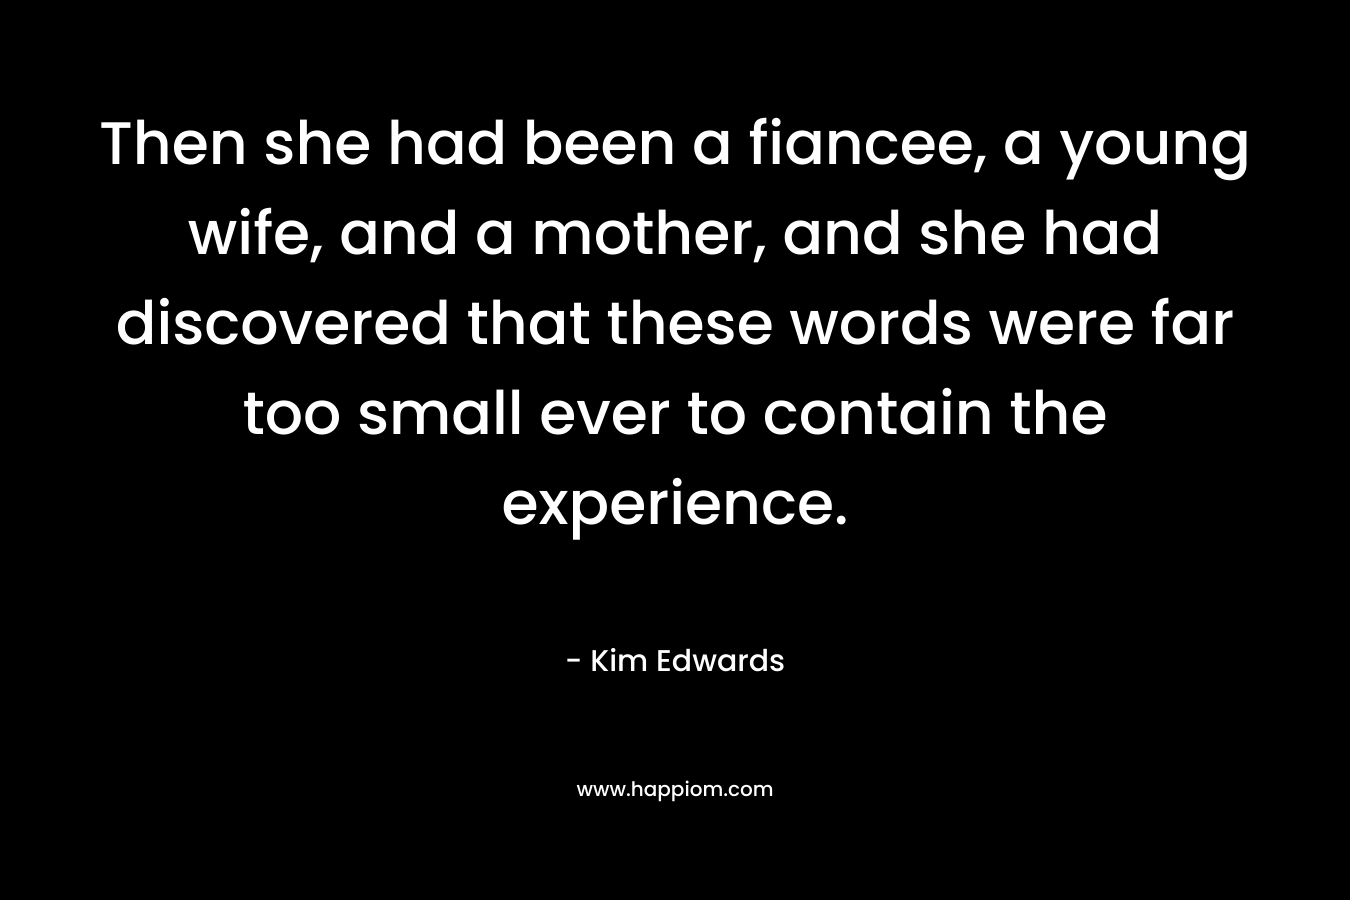 Then she had been a fiancee, a young wife, and a mother, and she had discovered that these words were far too small ever to contain the experience. – Kim Edwards